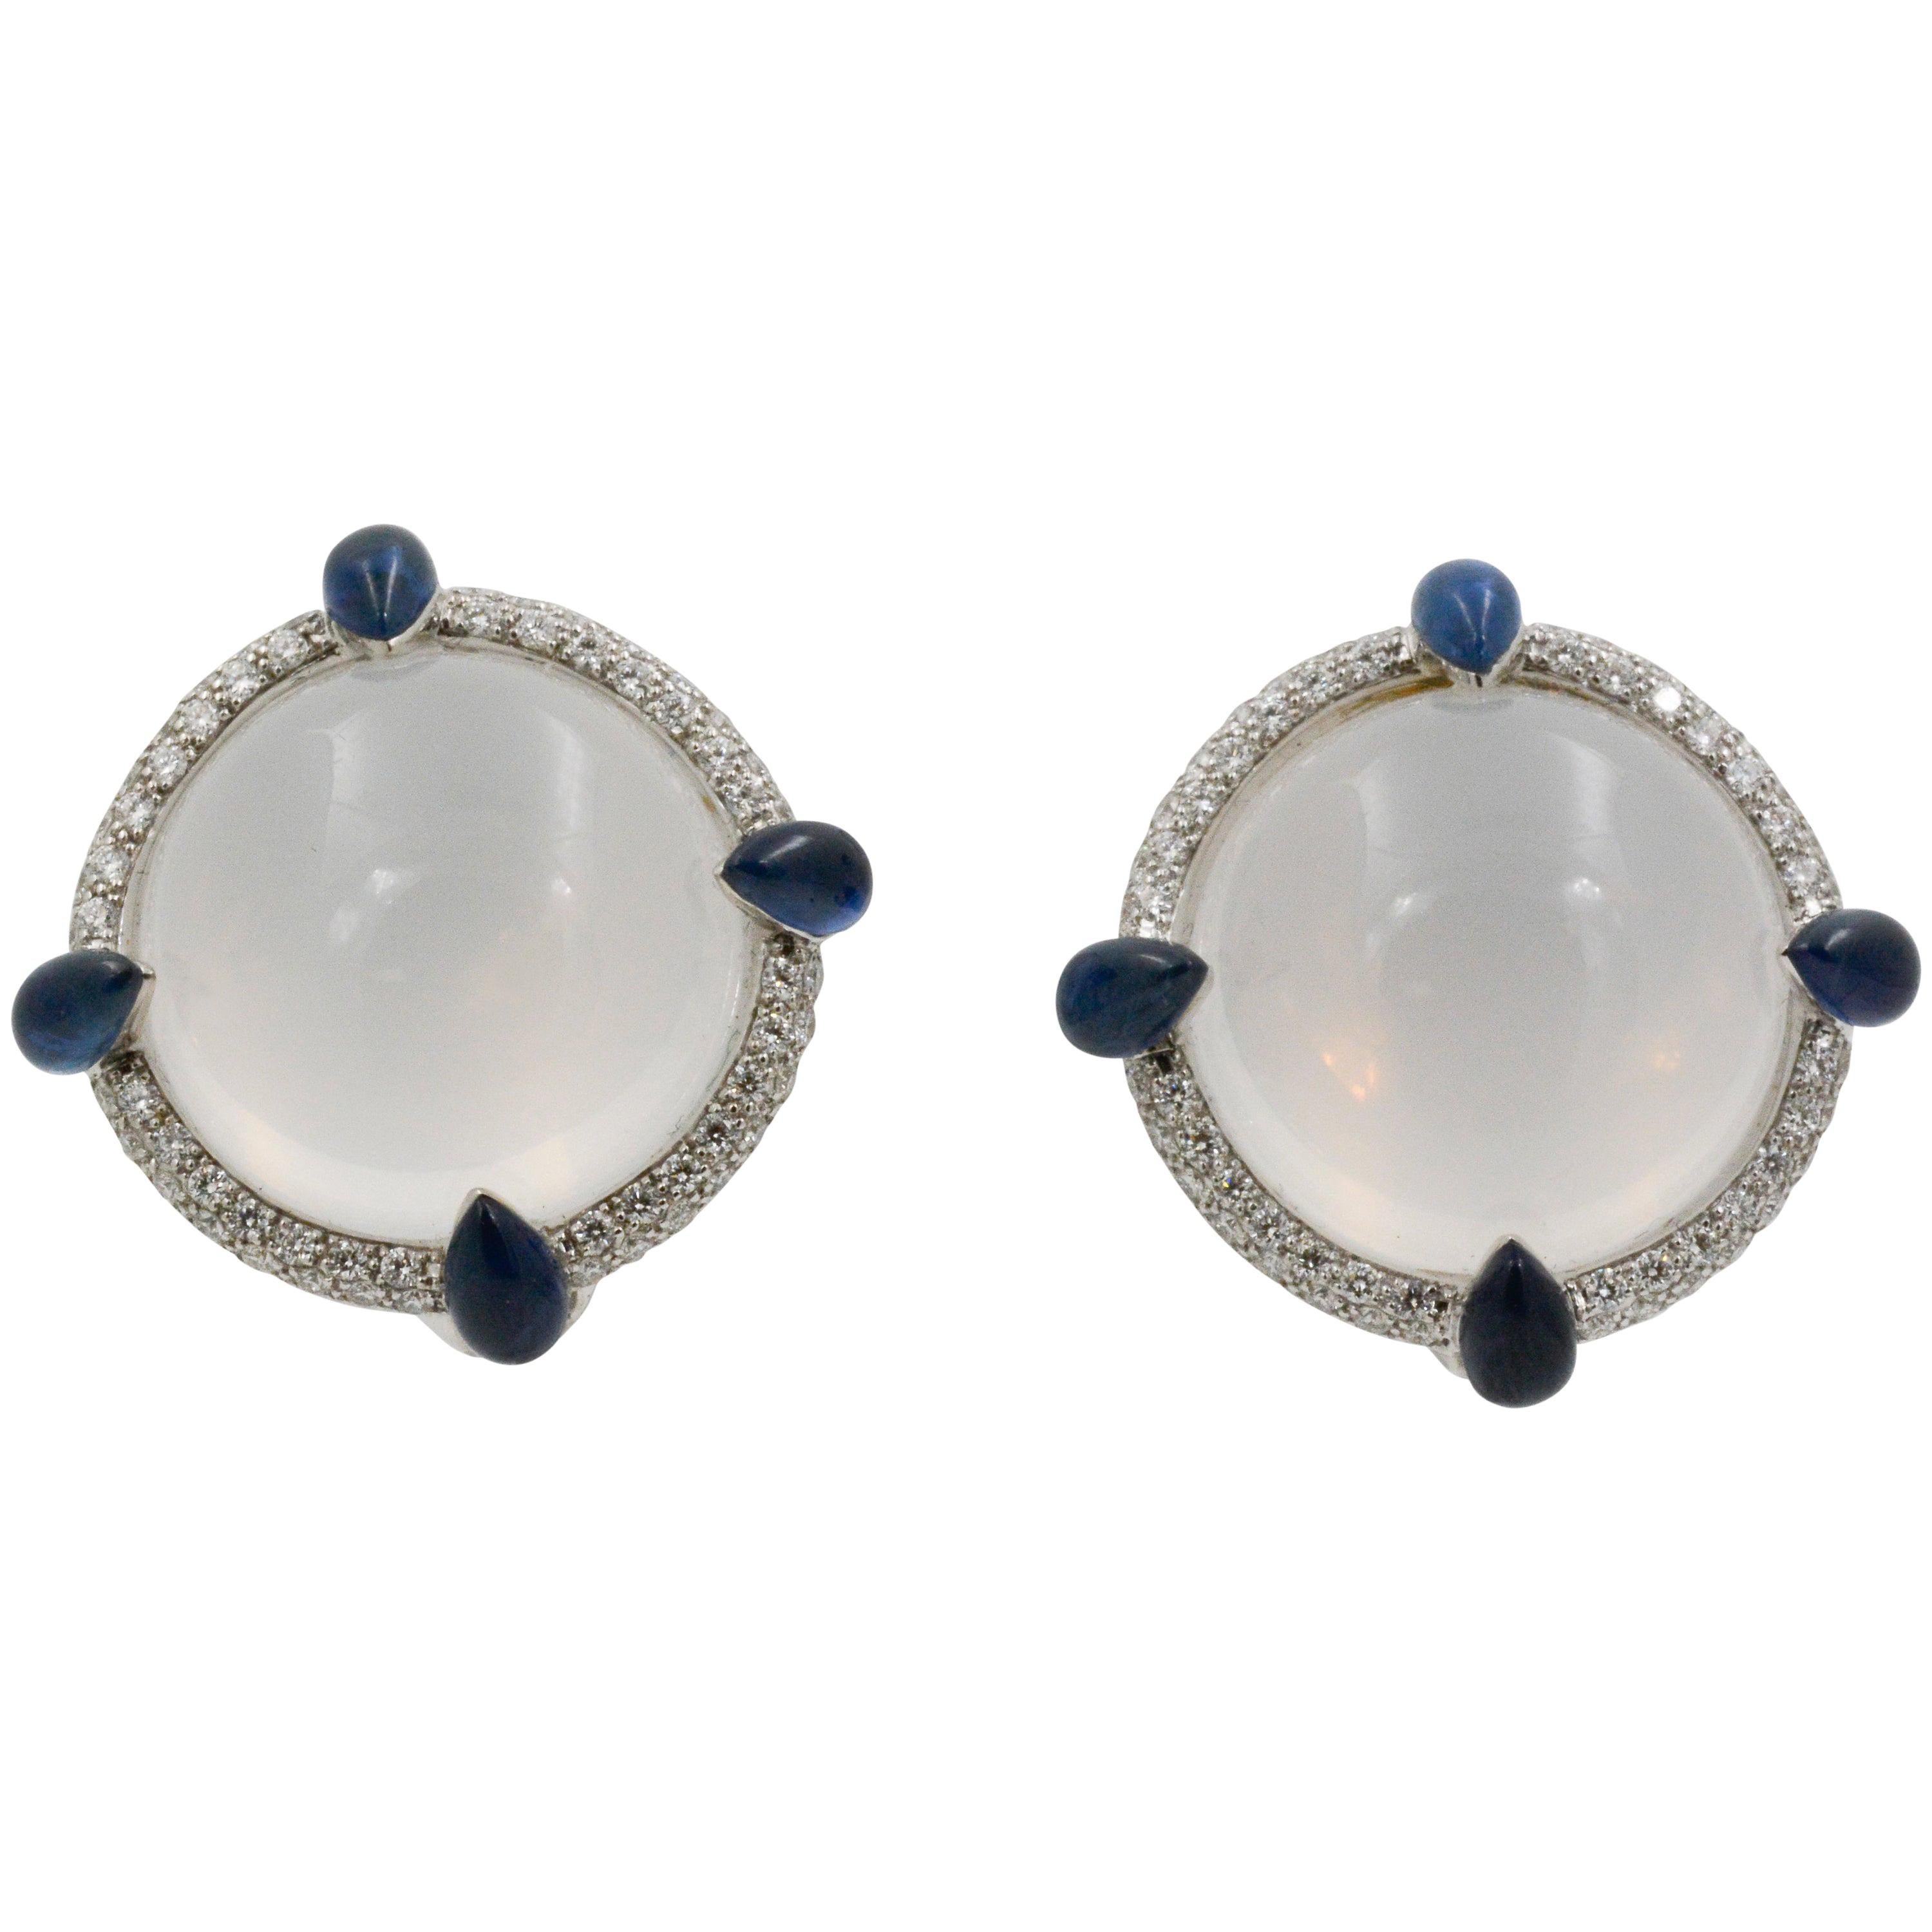 These Seaman Schepps 18k white gold earrings feature two cabochon white quartz that are accented with eight cabochon pear shaped sapphires and a pave diamond rim. The blue sapphires have a total weight of 3.68 carats and the diamonds have a total